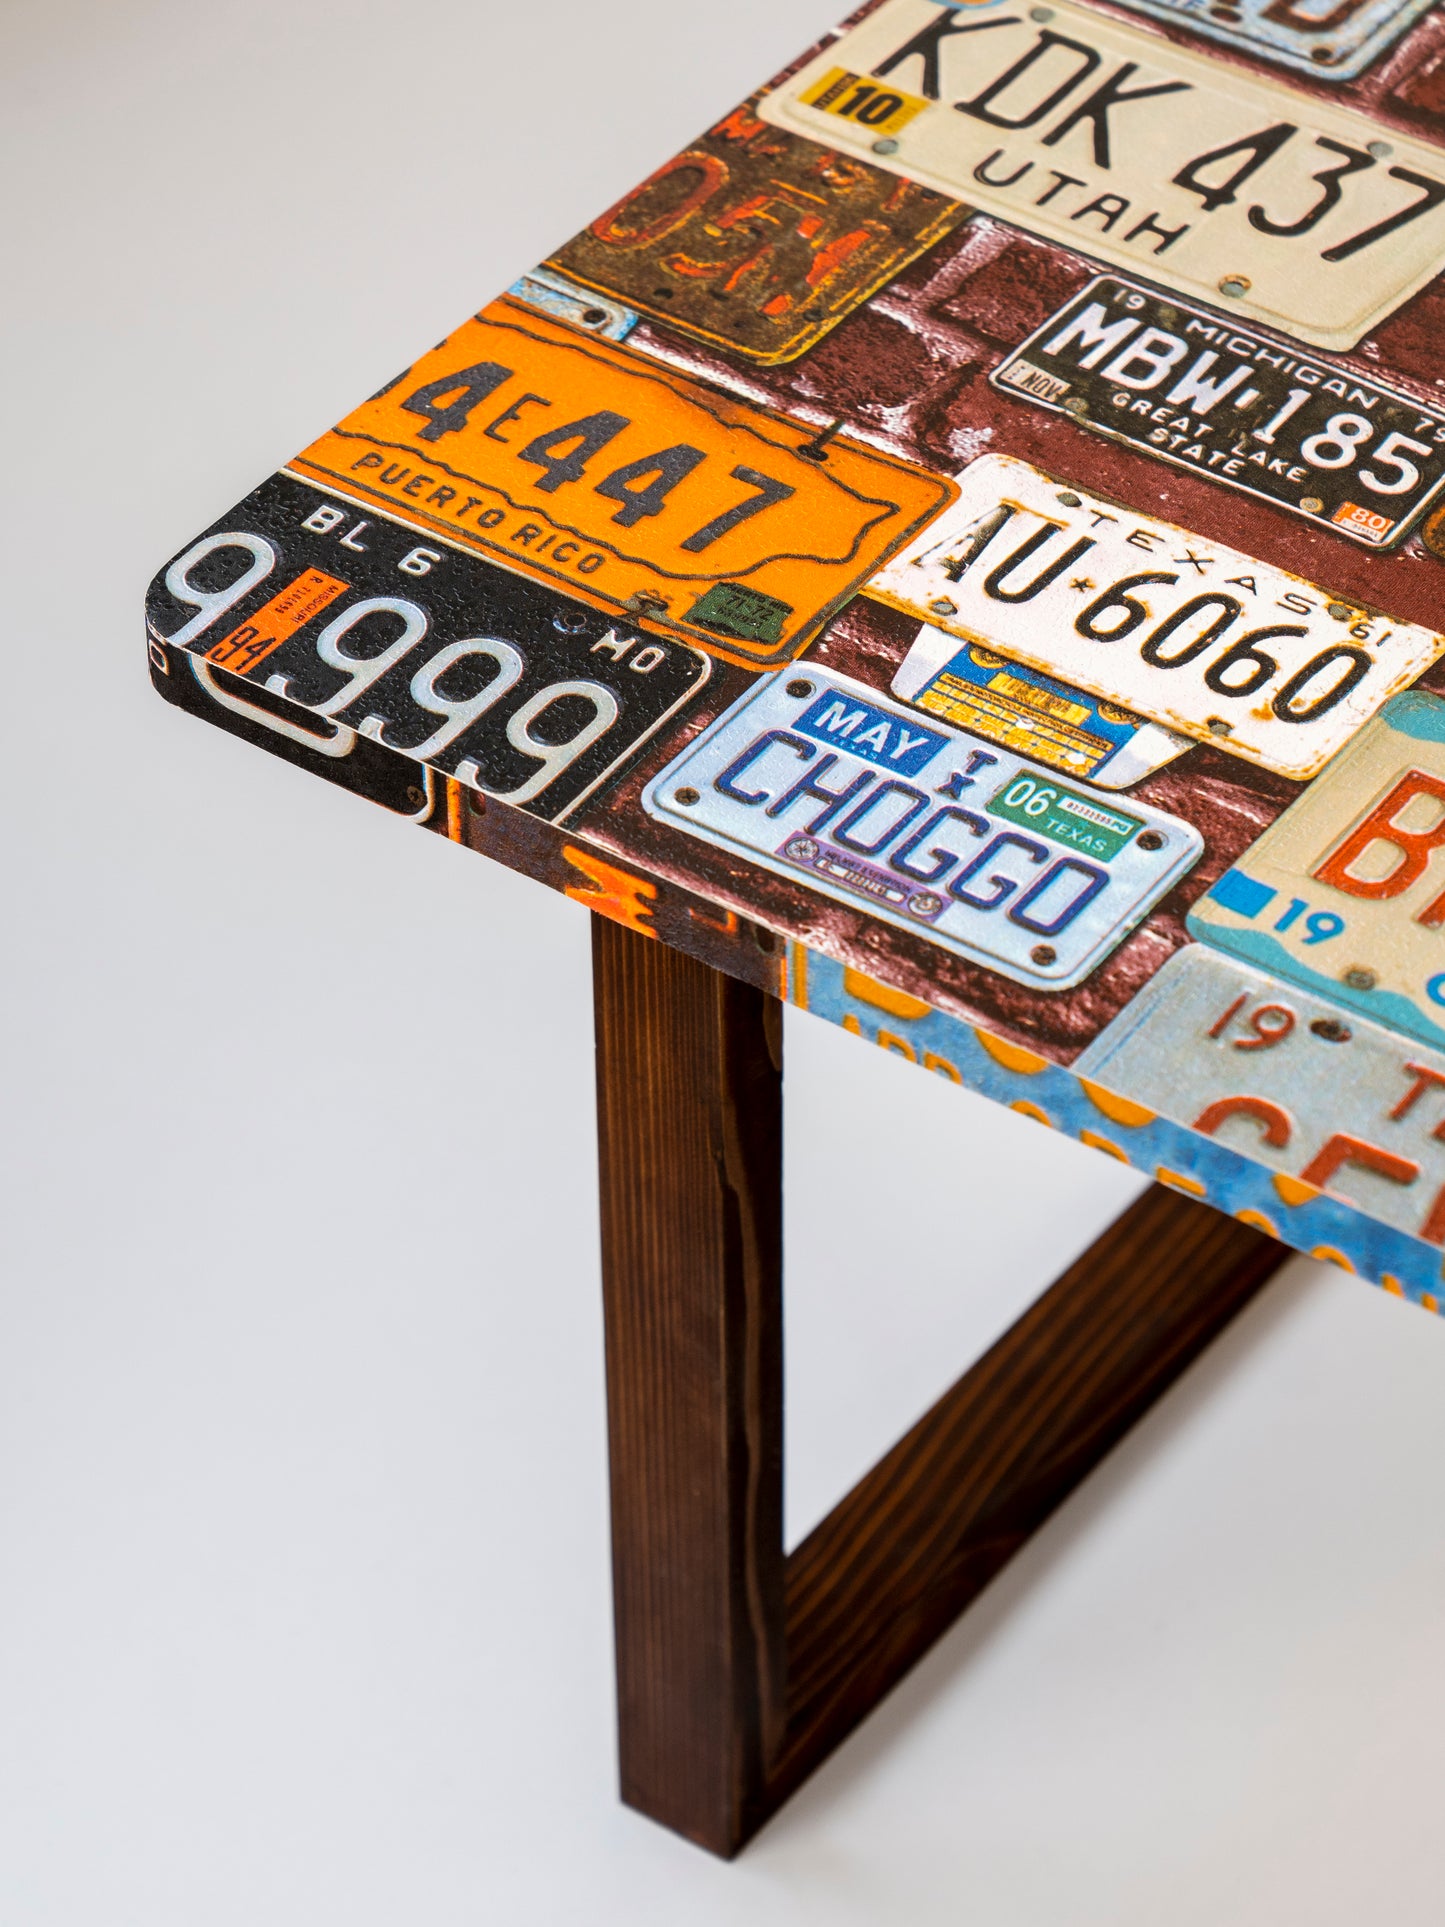 Muddy Miles Square Coffee Tables, Wooden Tables, Coffee Tables, Center Tables, Living Room Decor by A Tiny Mistake